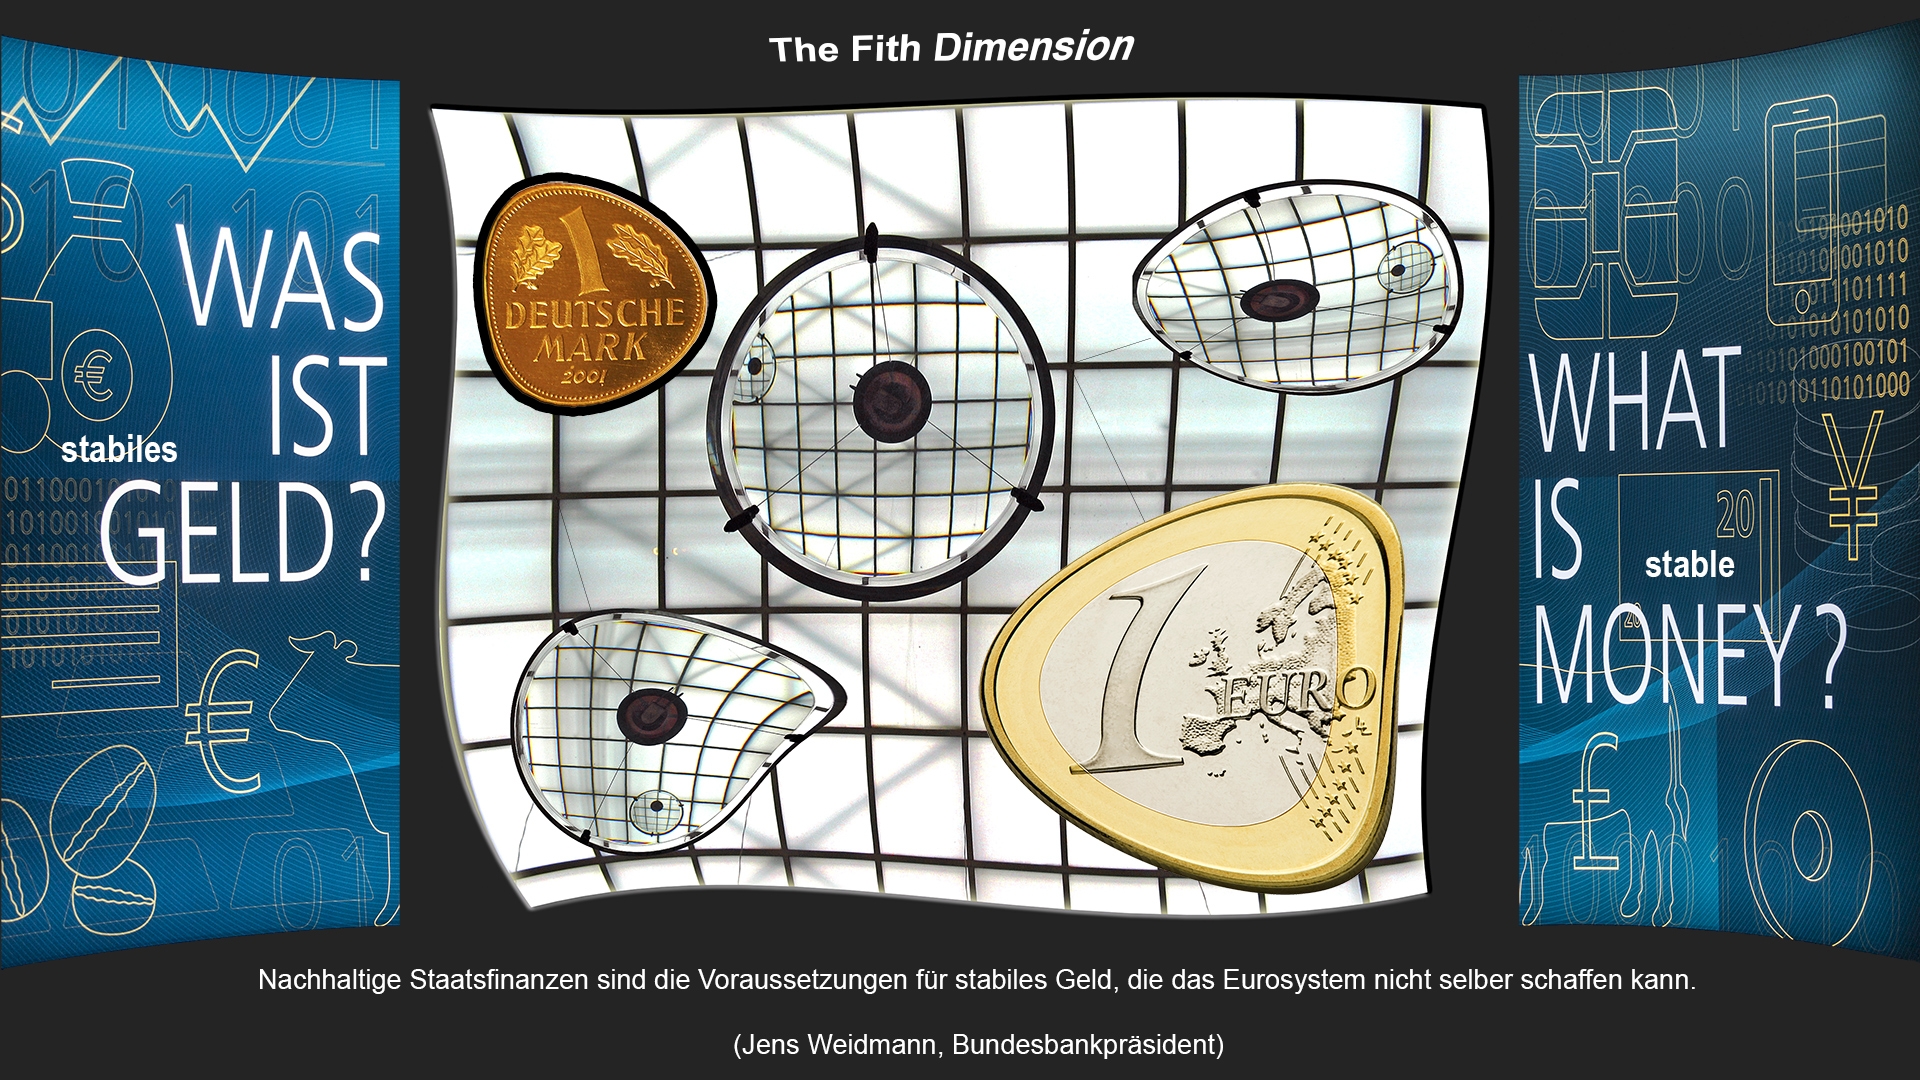 The Fith Dimension - What is stable money?